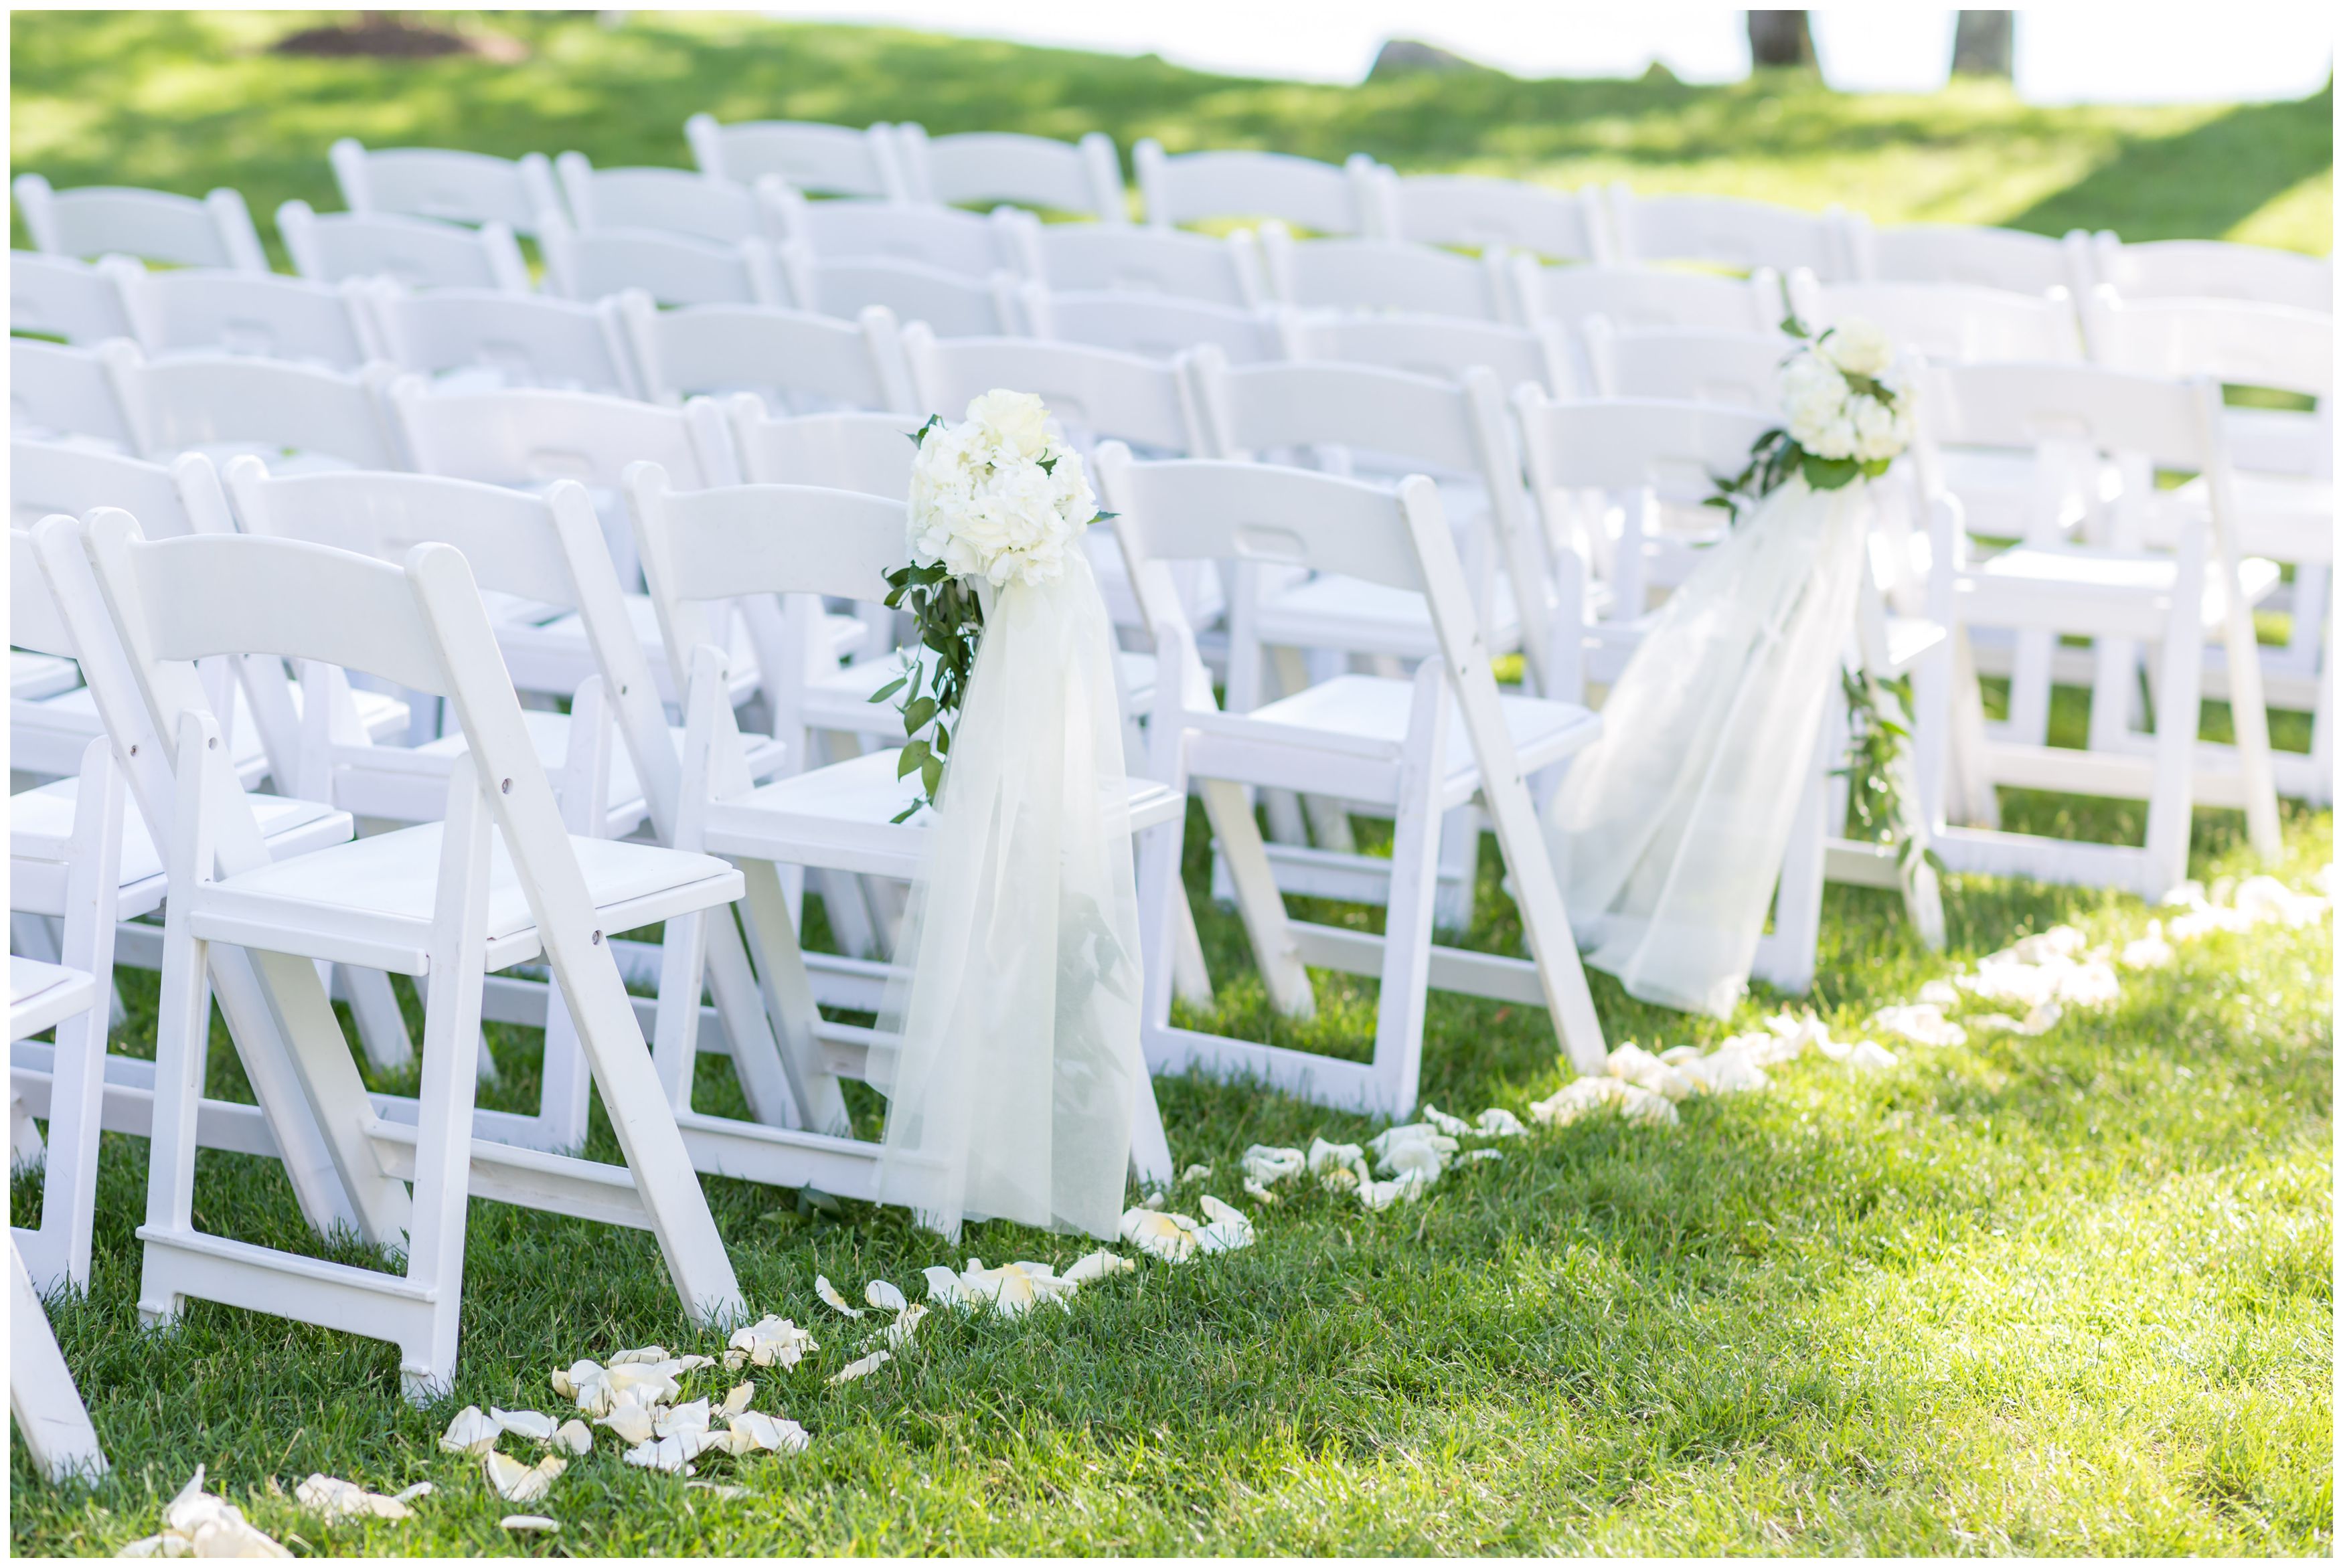 White floral ceremony details at an outdoor lakeside ceremony